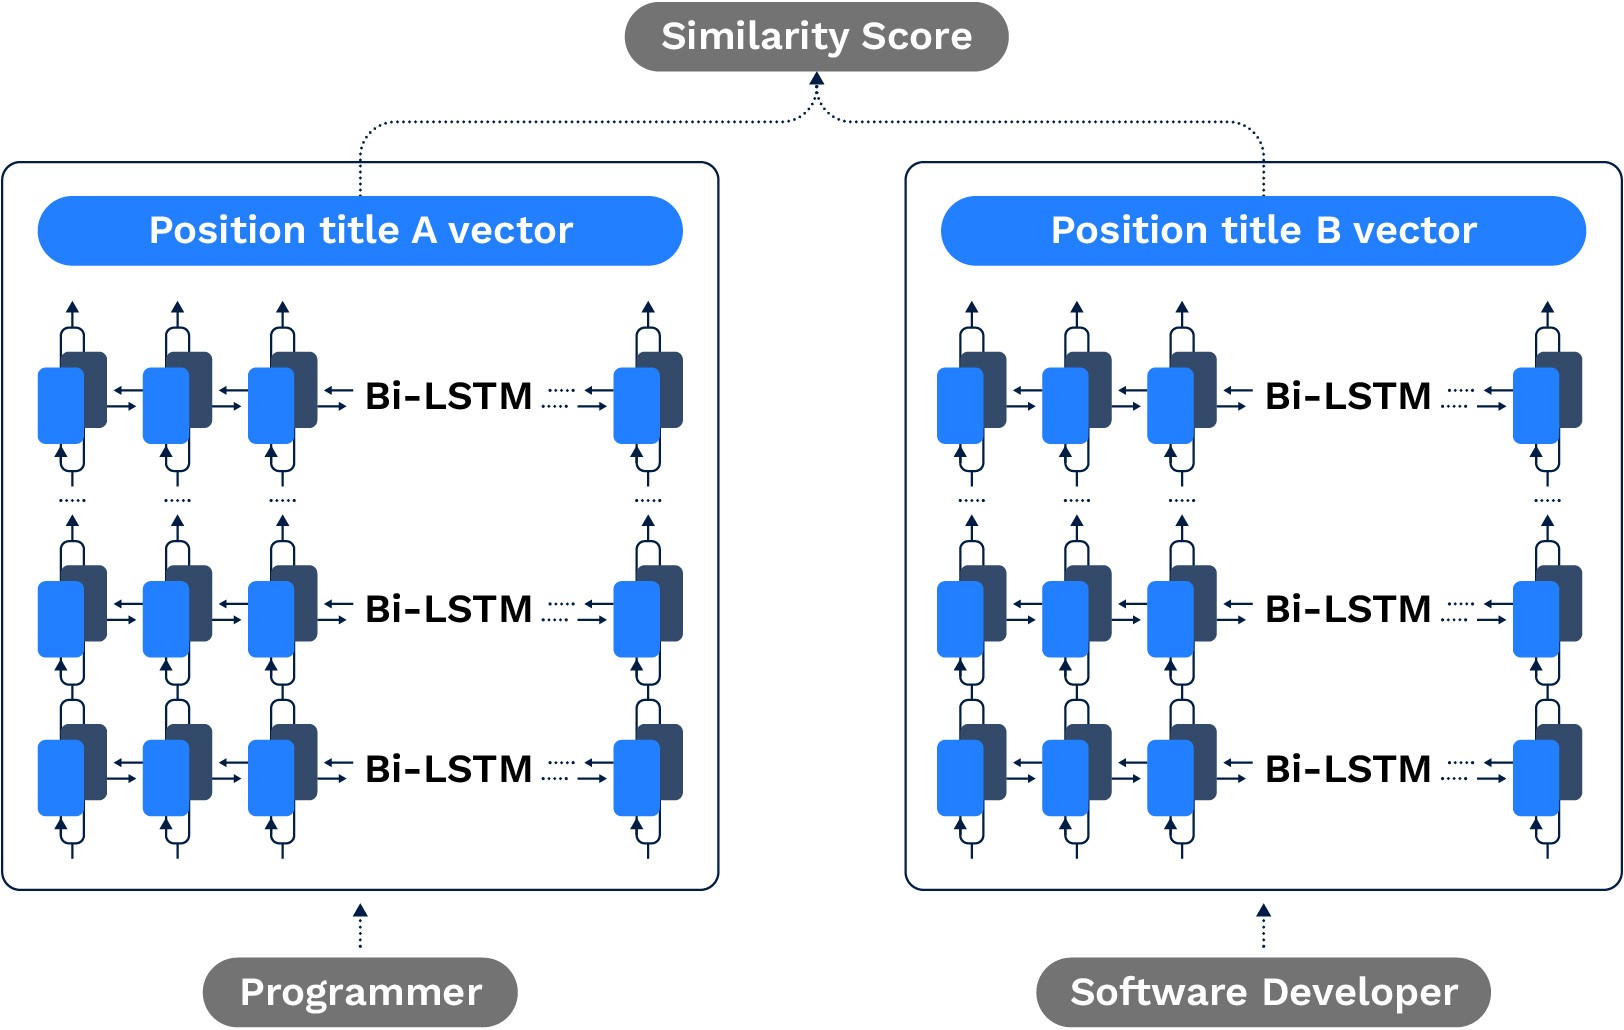 A figure of the model in use, comparing the job titles of programmer and software developer.